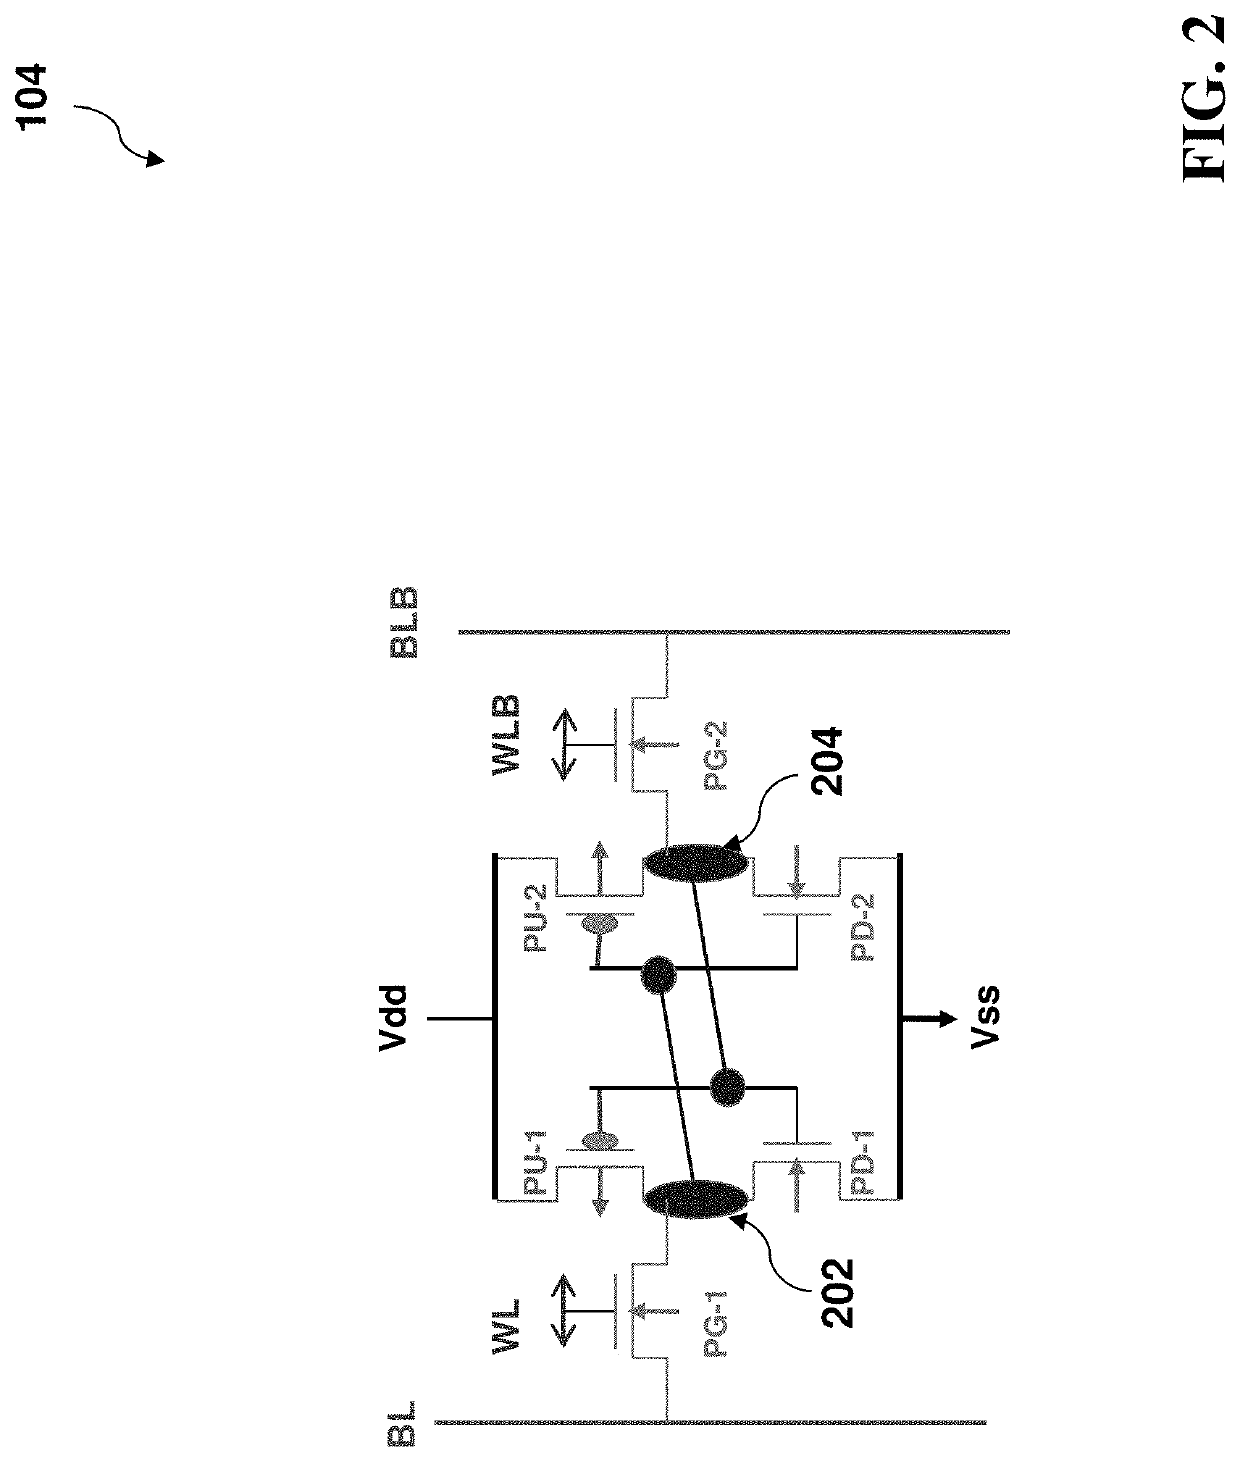 SRAM Structure and Connection